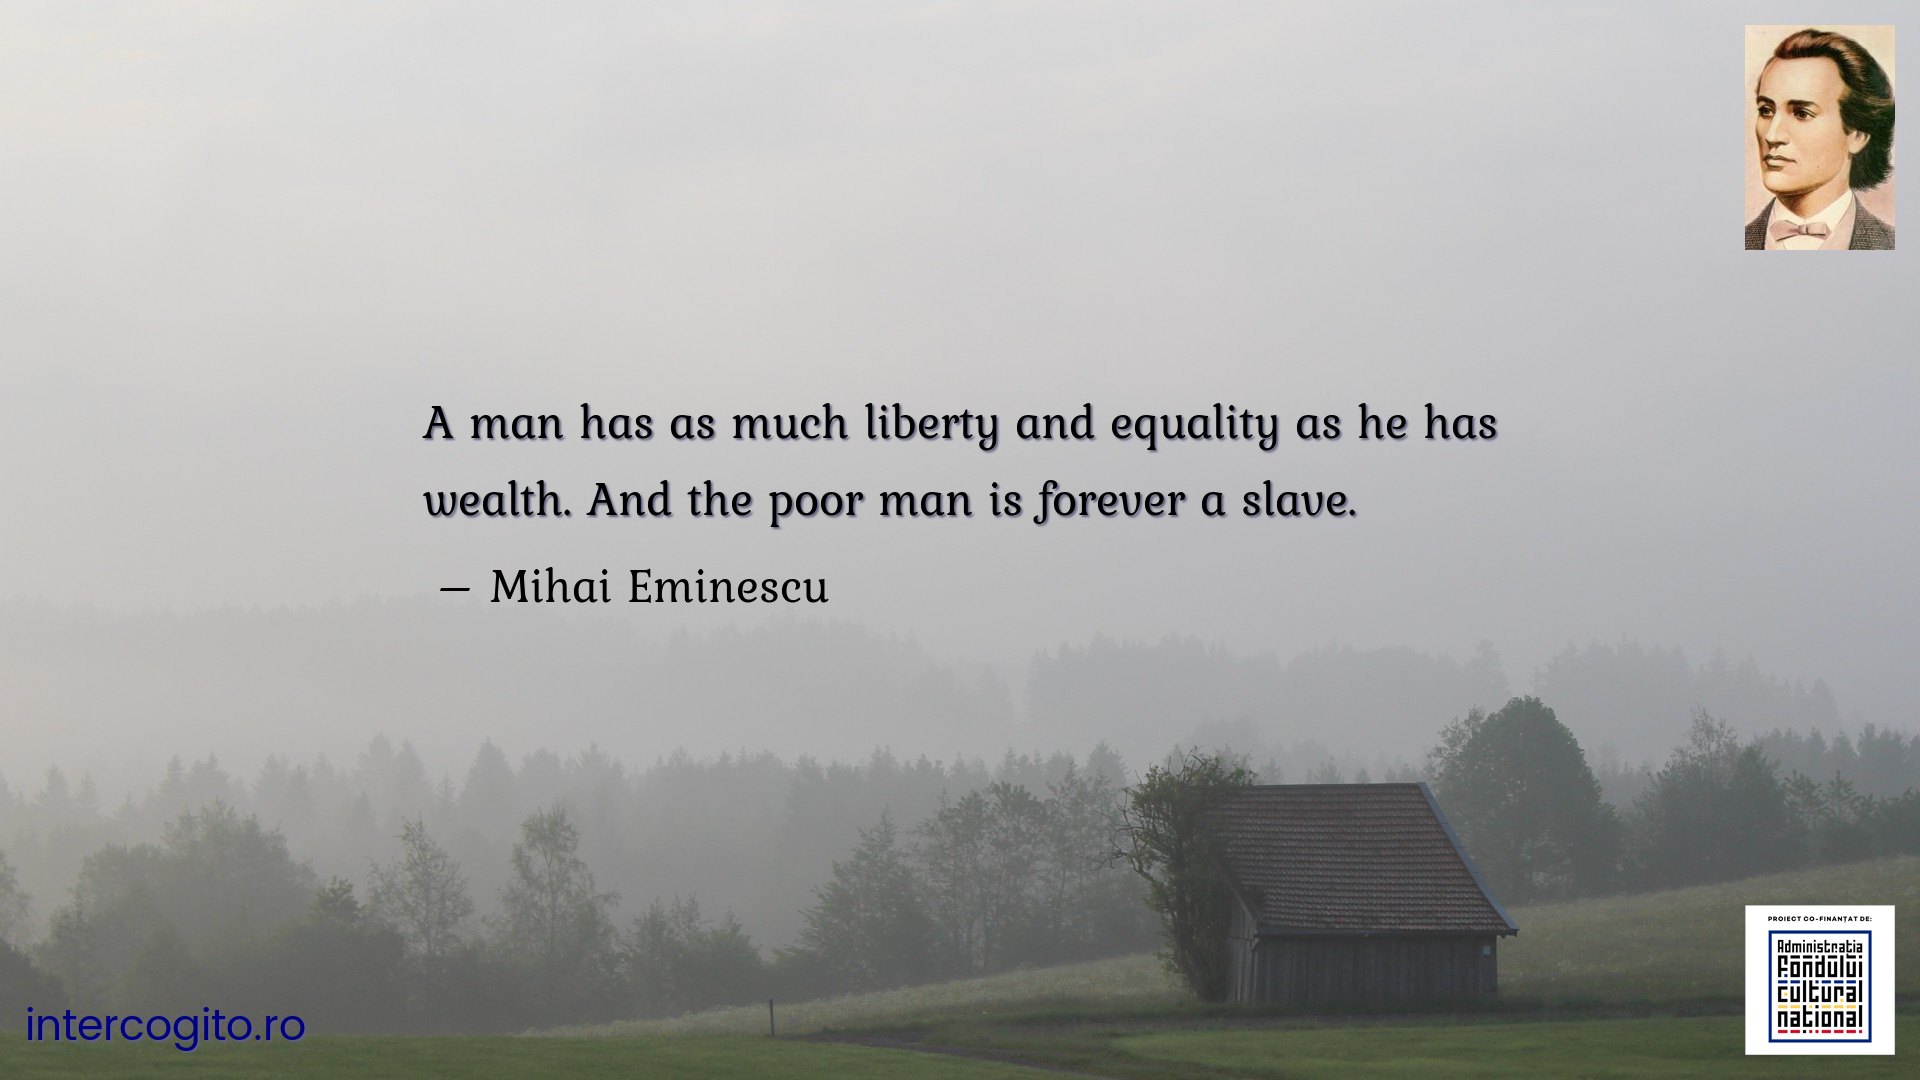 A man has as much liberty and equality as he has wealth. And the poor man is forever a slave.